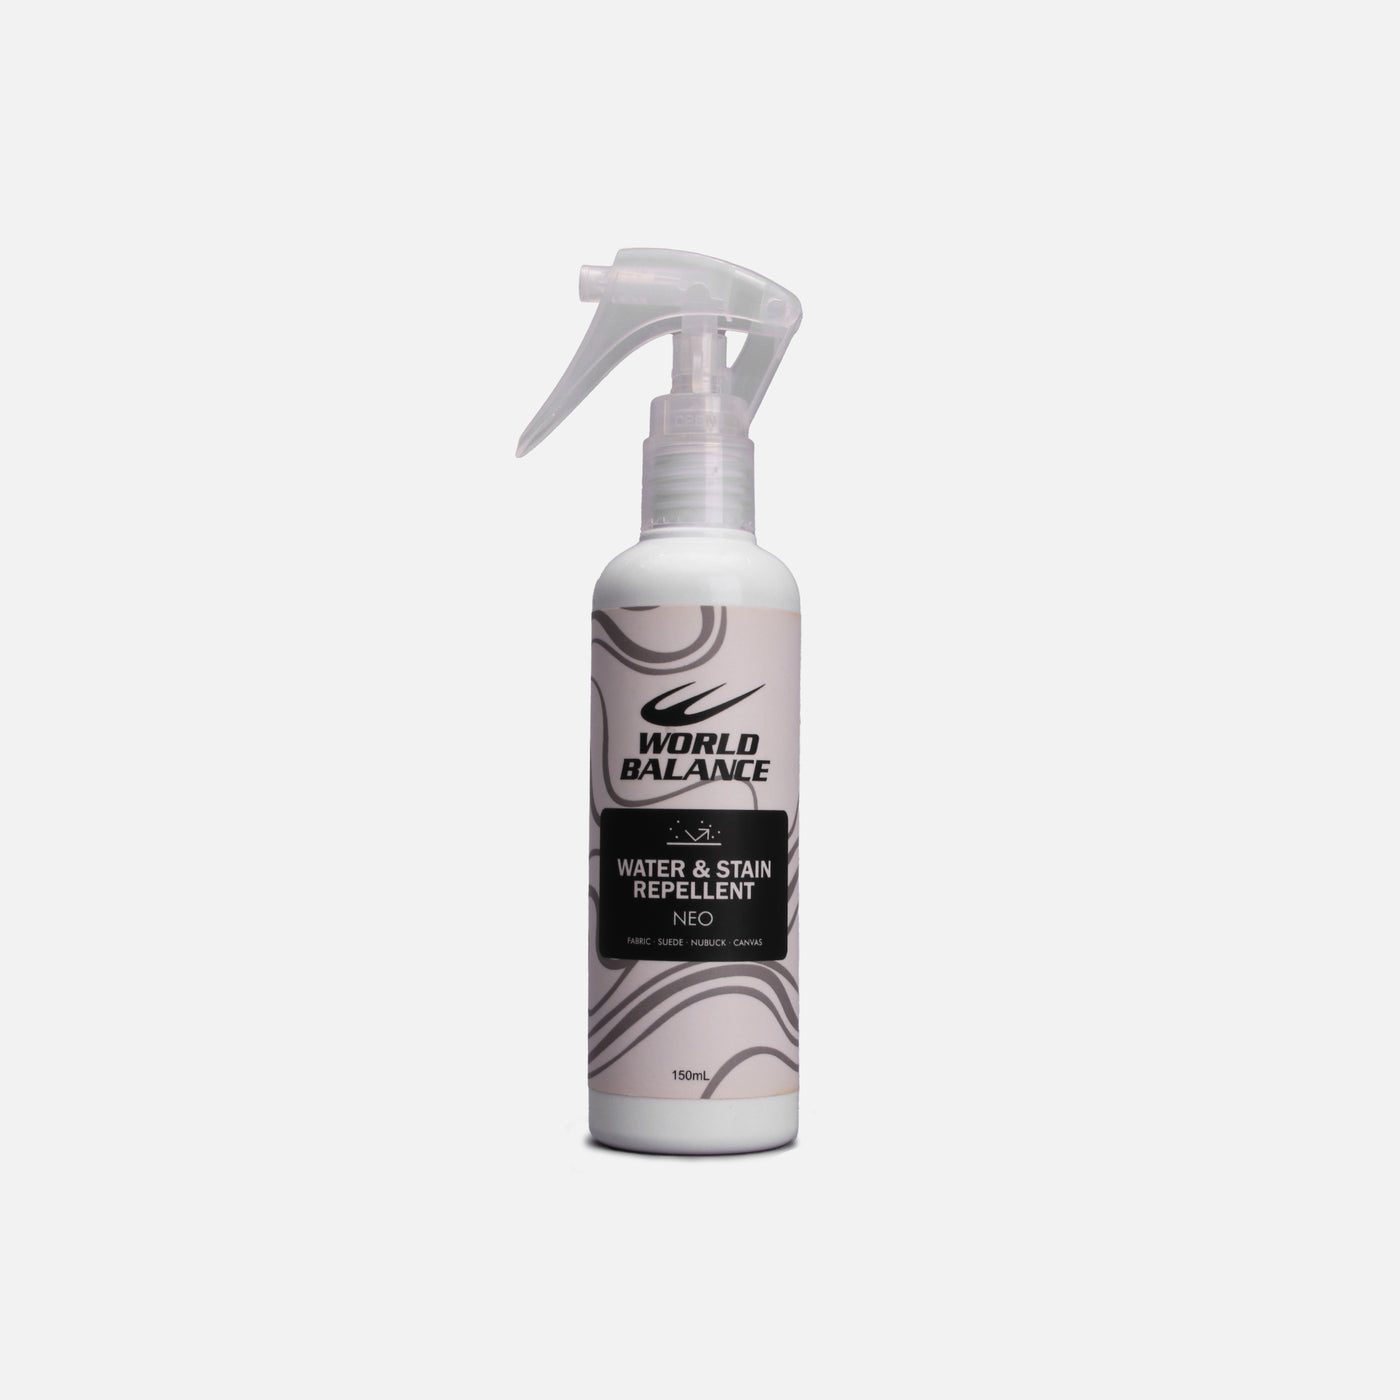 WATER & STAIN REPELLANT NEO – World Balance